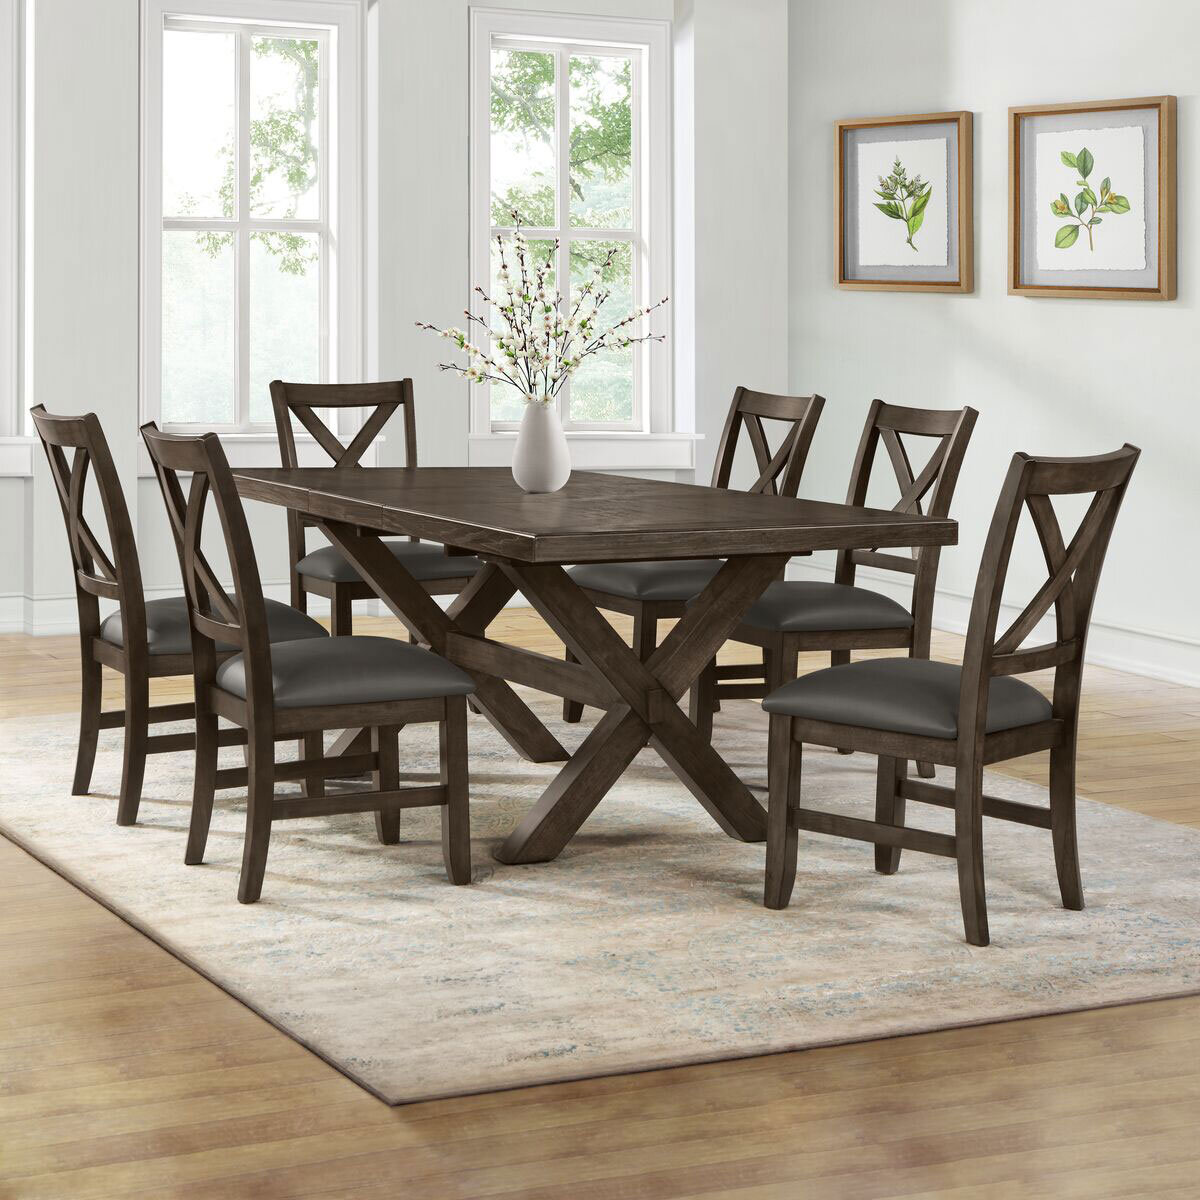 Hawthorne 9-Piece Dining Table Set Costco, 58% OFF